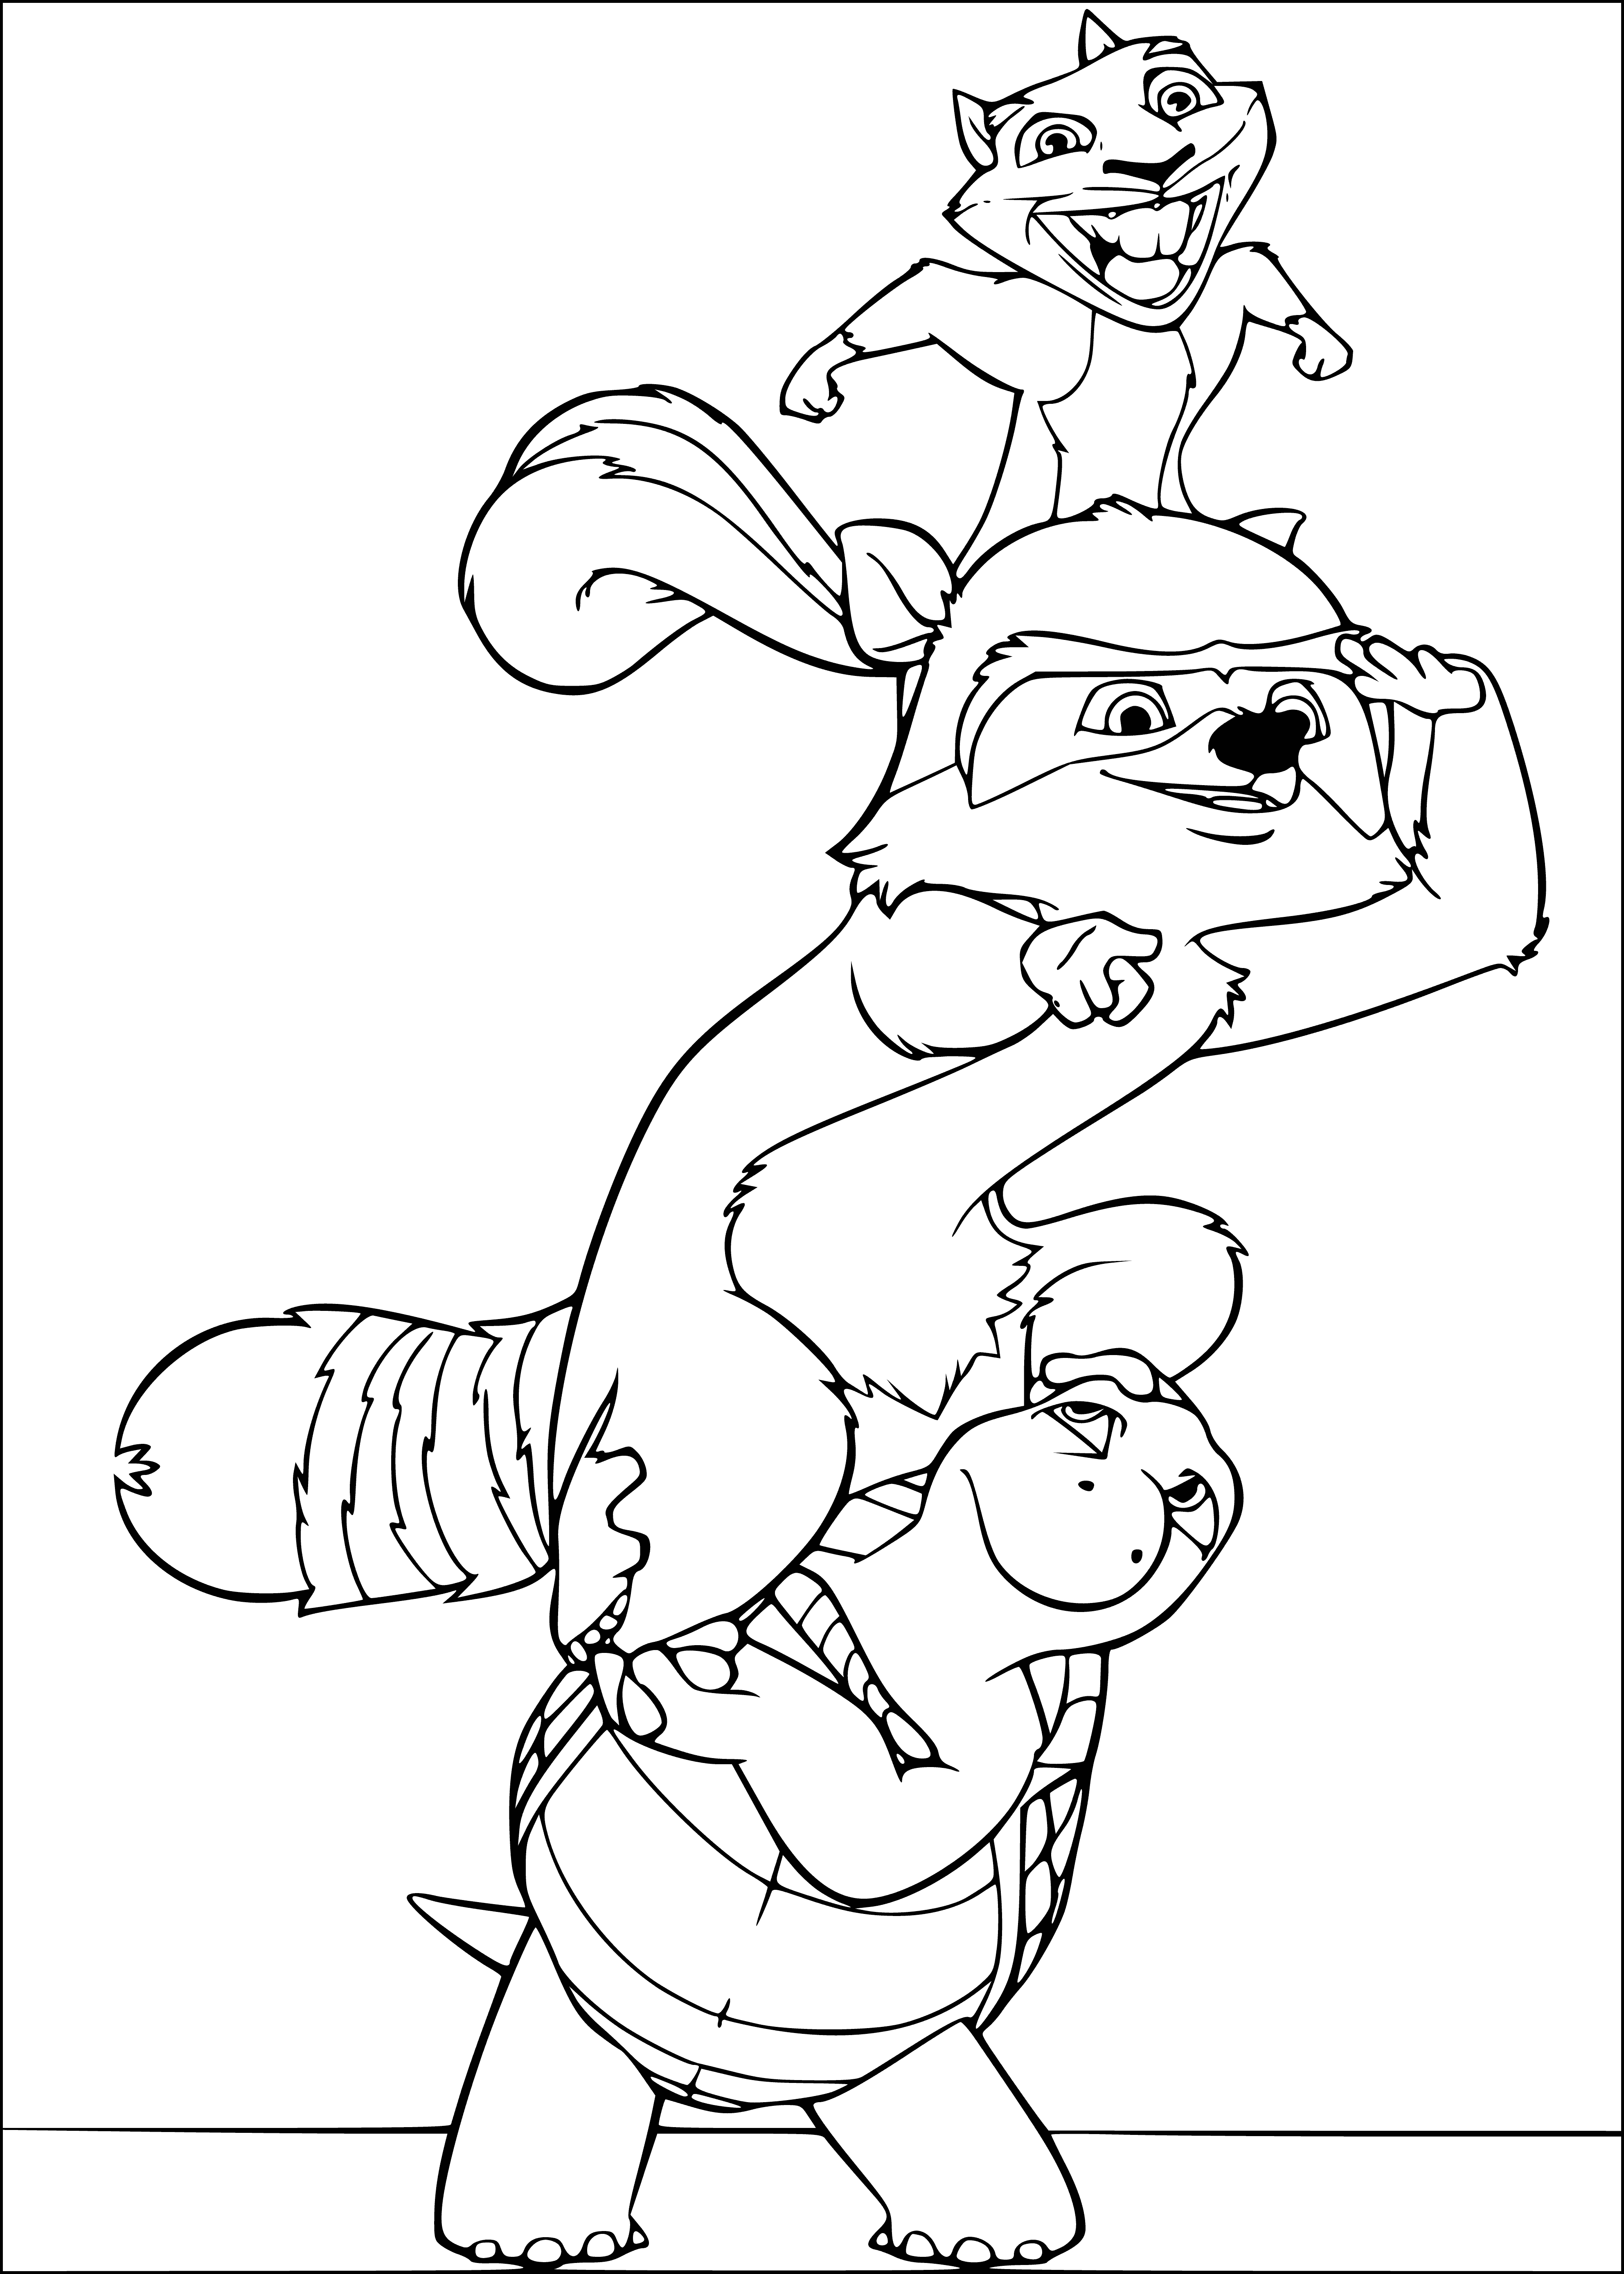 Turtle, Erjey and Hammie coloring page